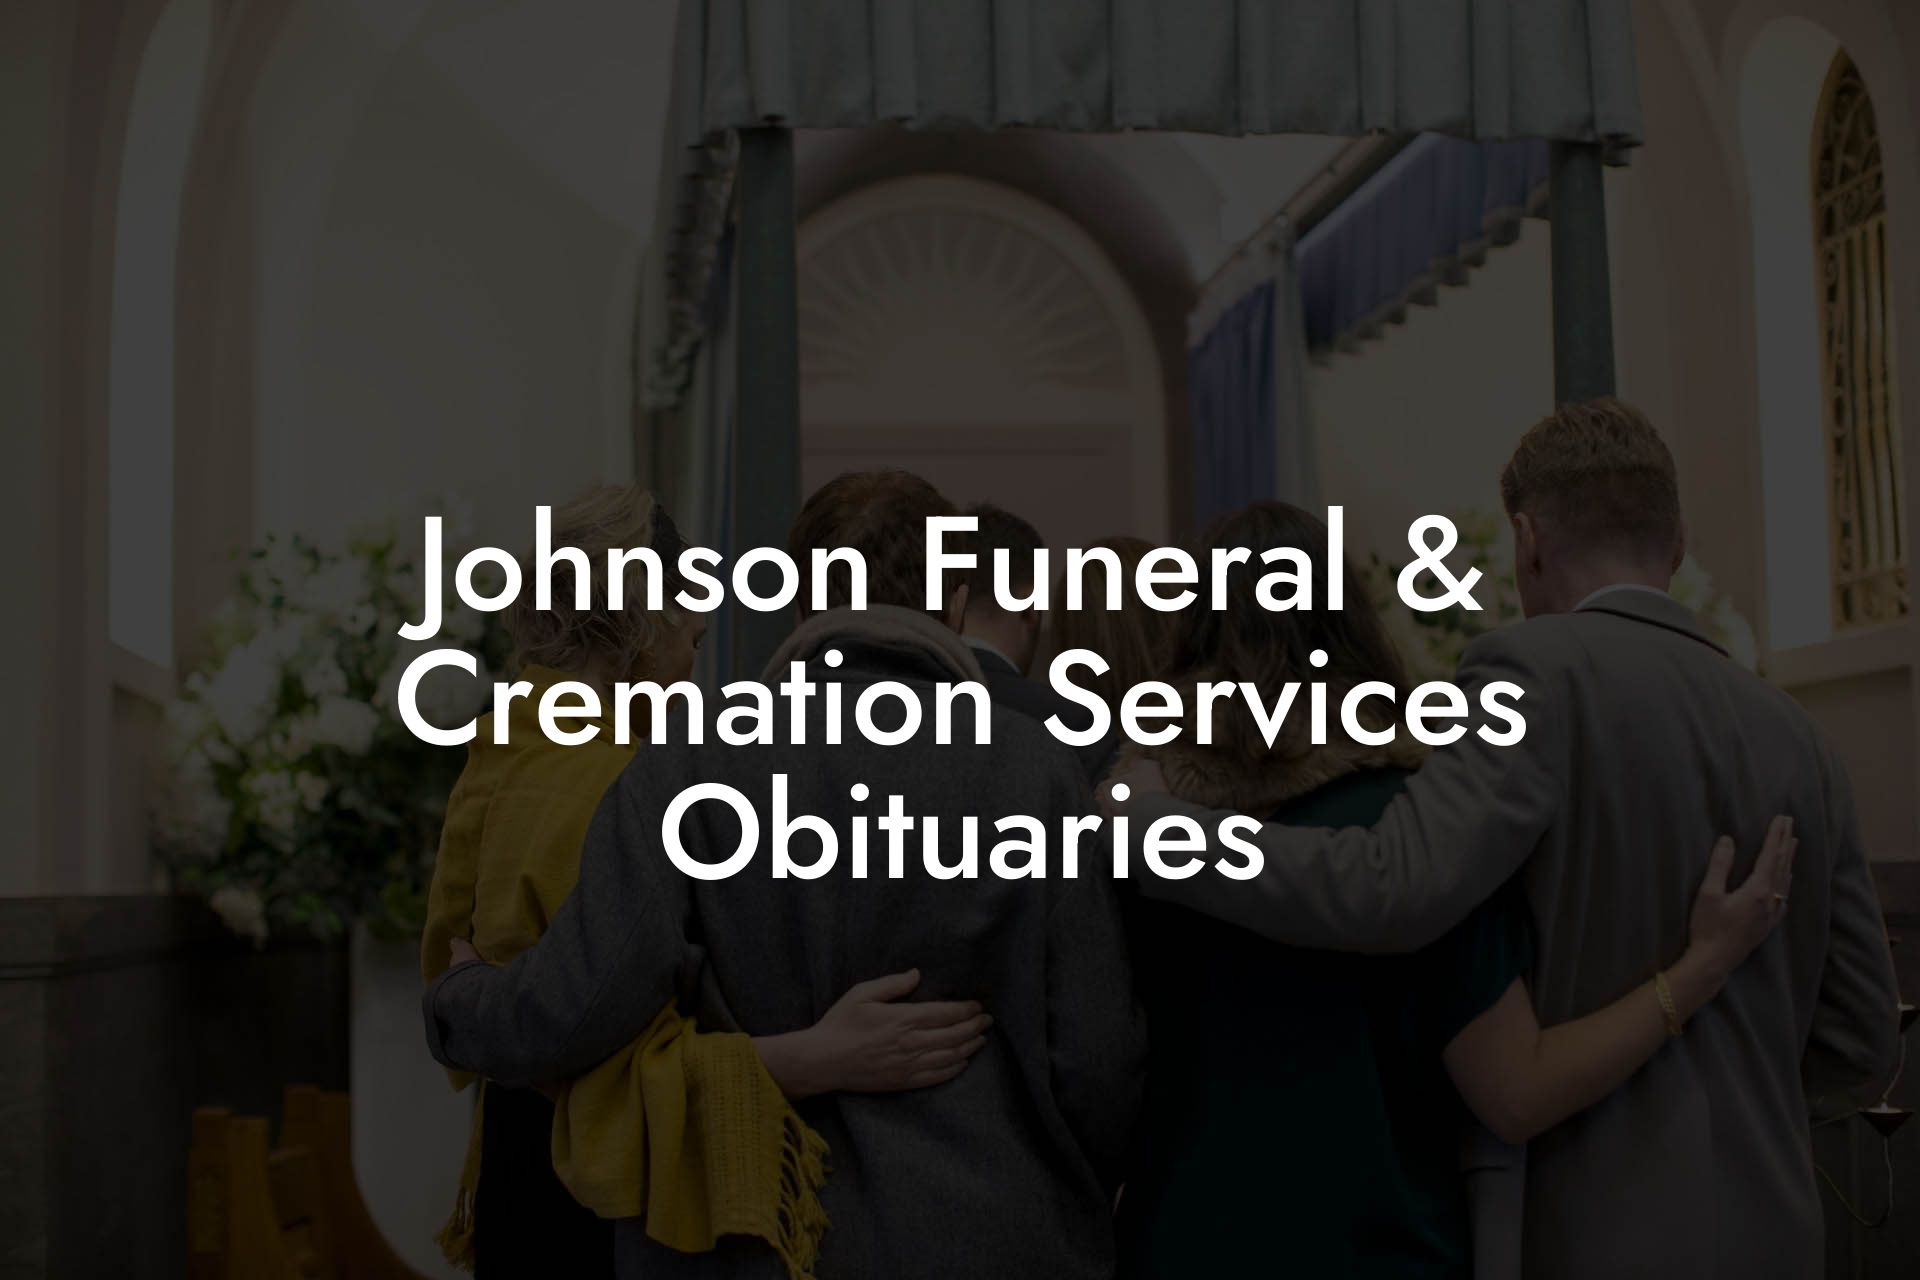 Johnson Funeral & Cremation Services Obituaries